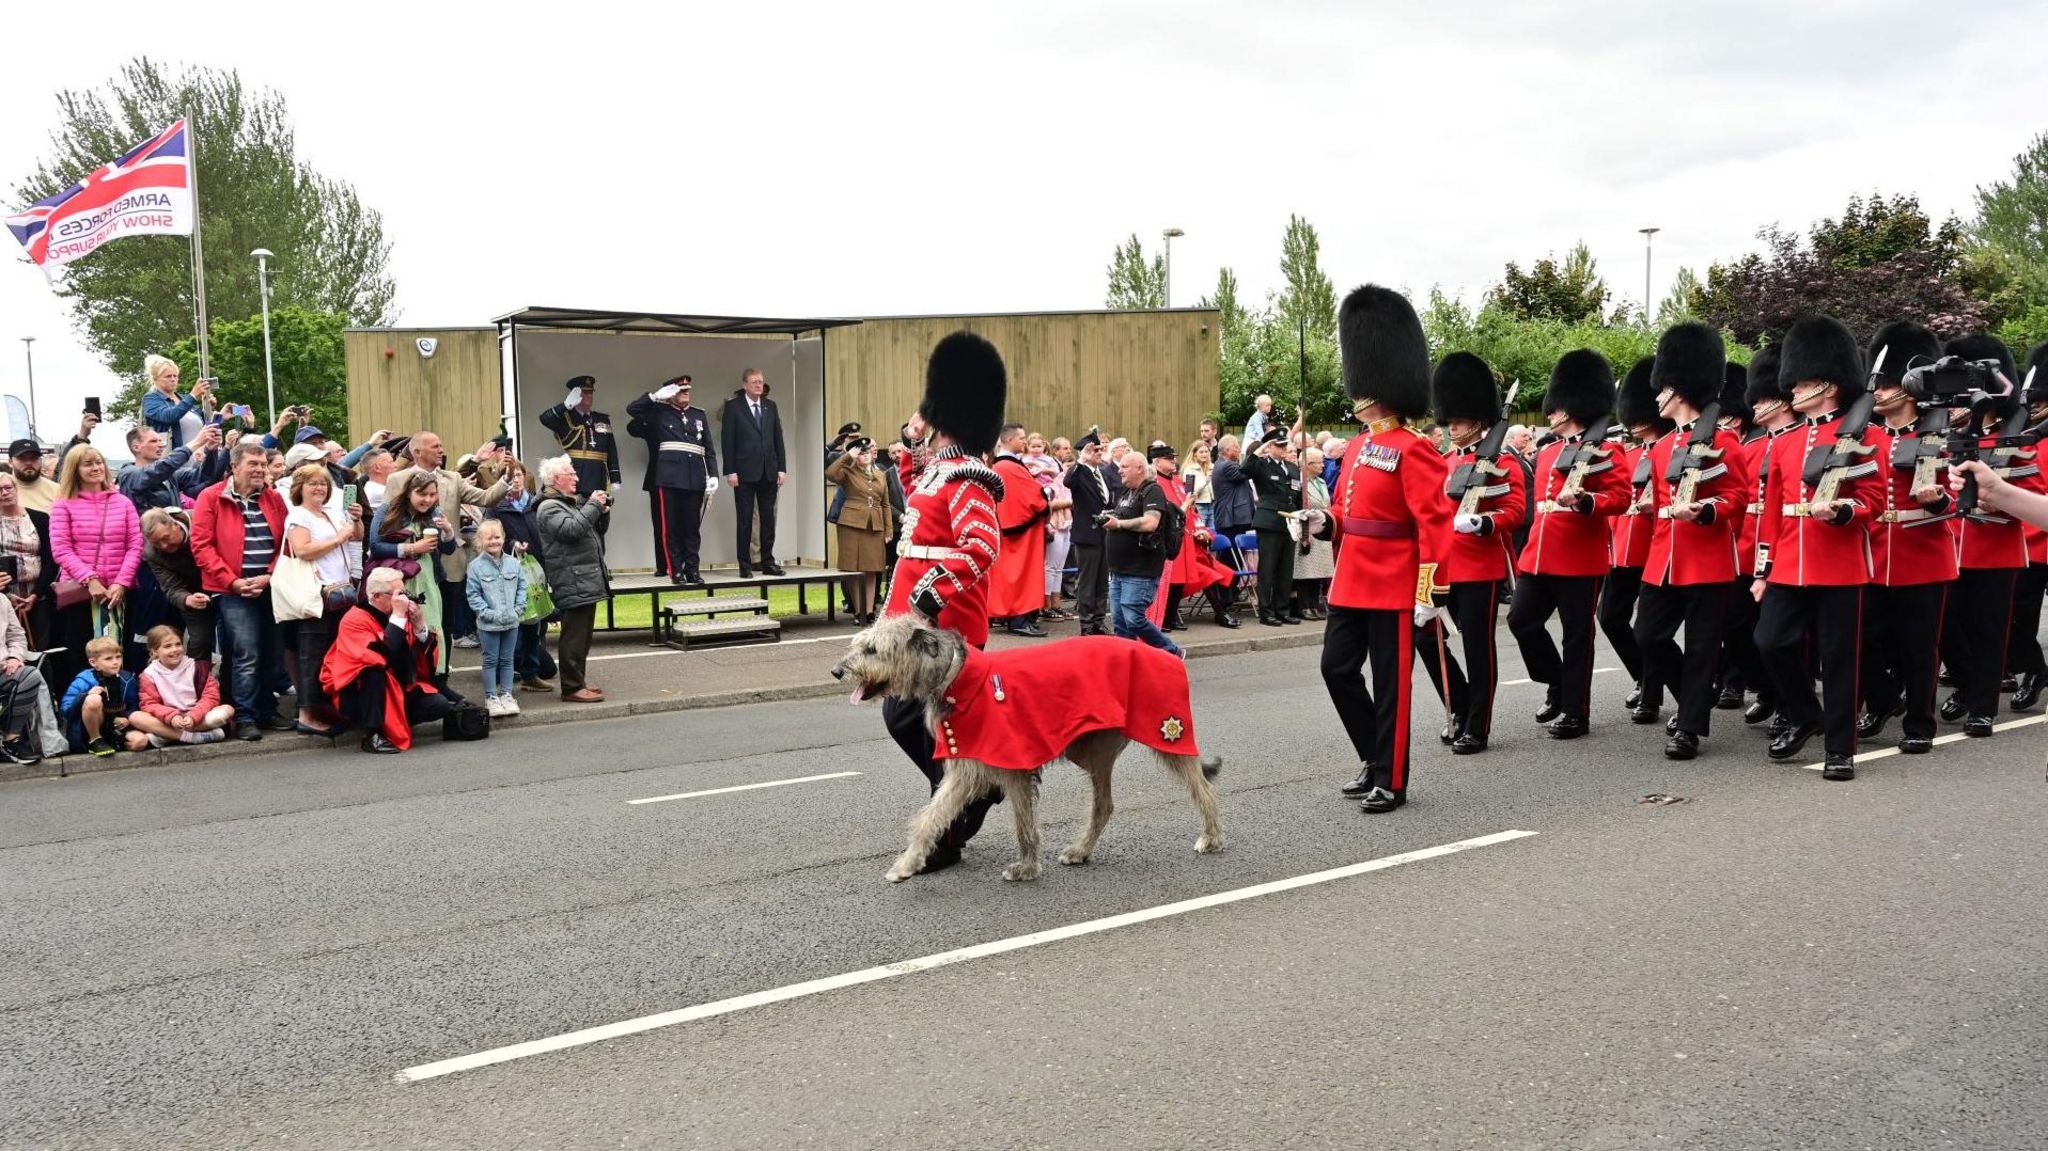 Irish Guards and Irish Wolfhound as part of the Armed Forces Day Parade at Jordanstown Loughshore Park